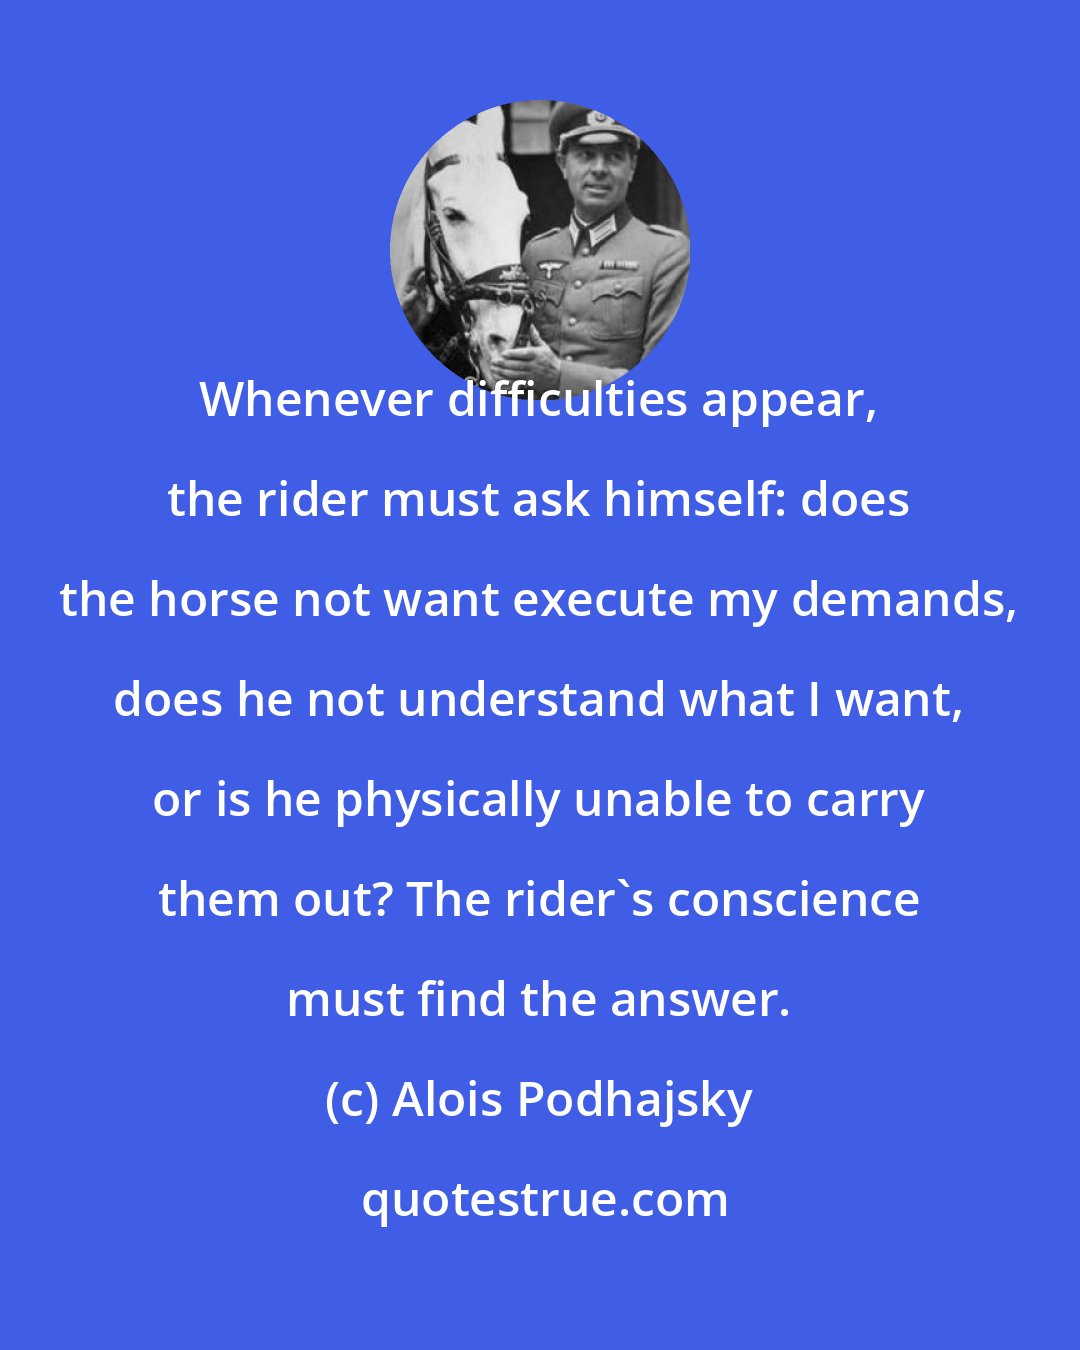 Alois Podhajsky: Whenever difficulties appear, the rider must ask himself: does the horse not want execute my demands, does he not understand what I want, or is he physically unable to carry them out? The rider's conscience must find the answer.